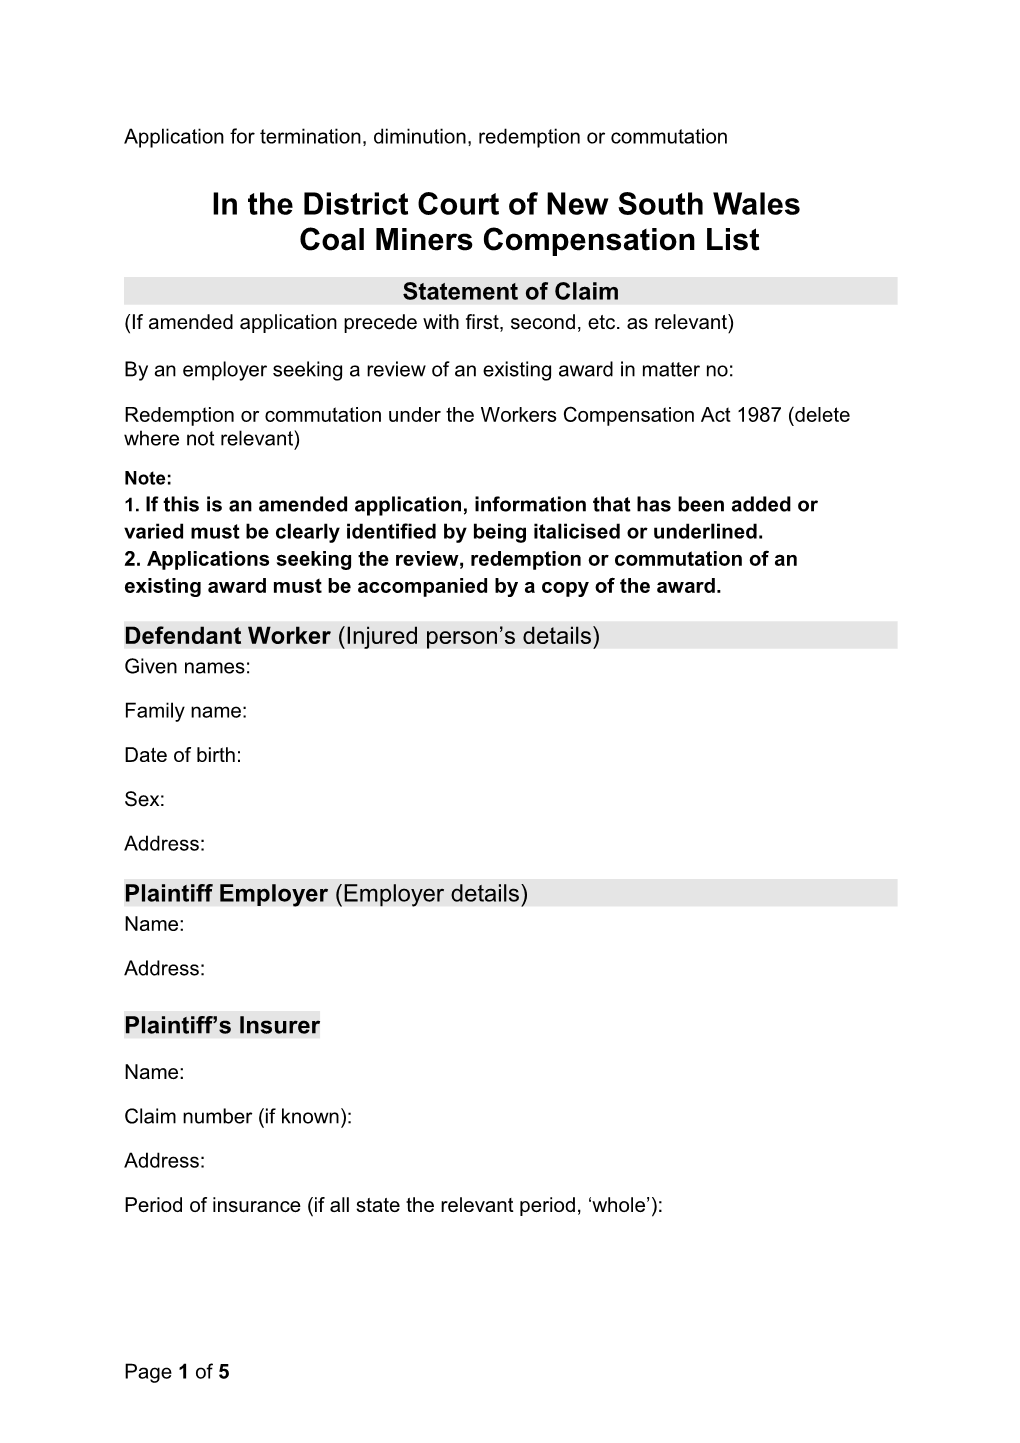 Coal Miners Workers Compensation List